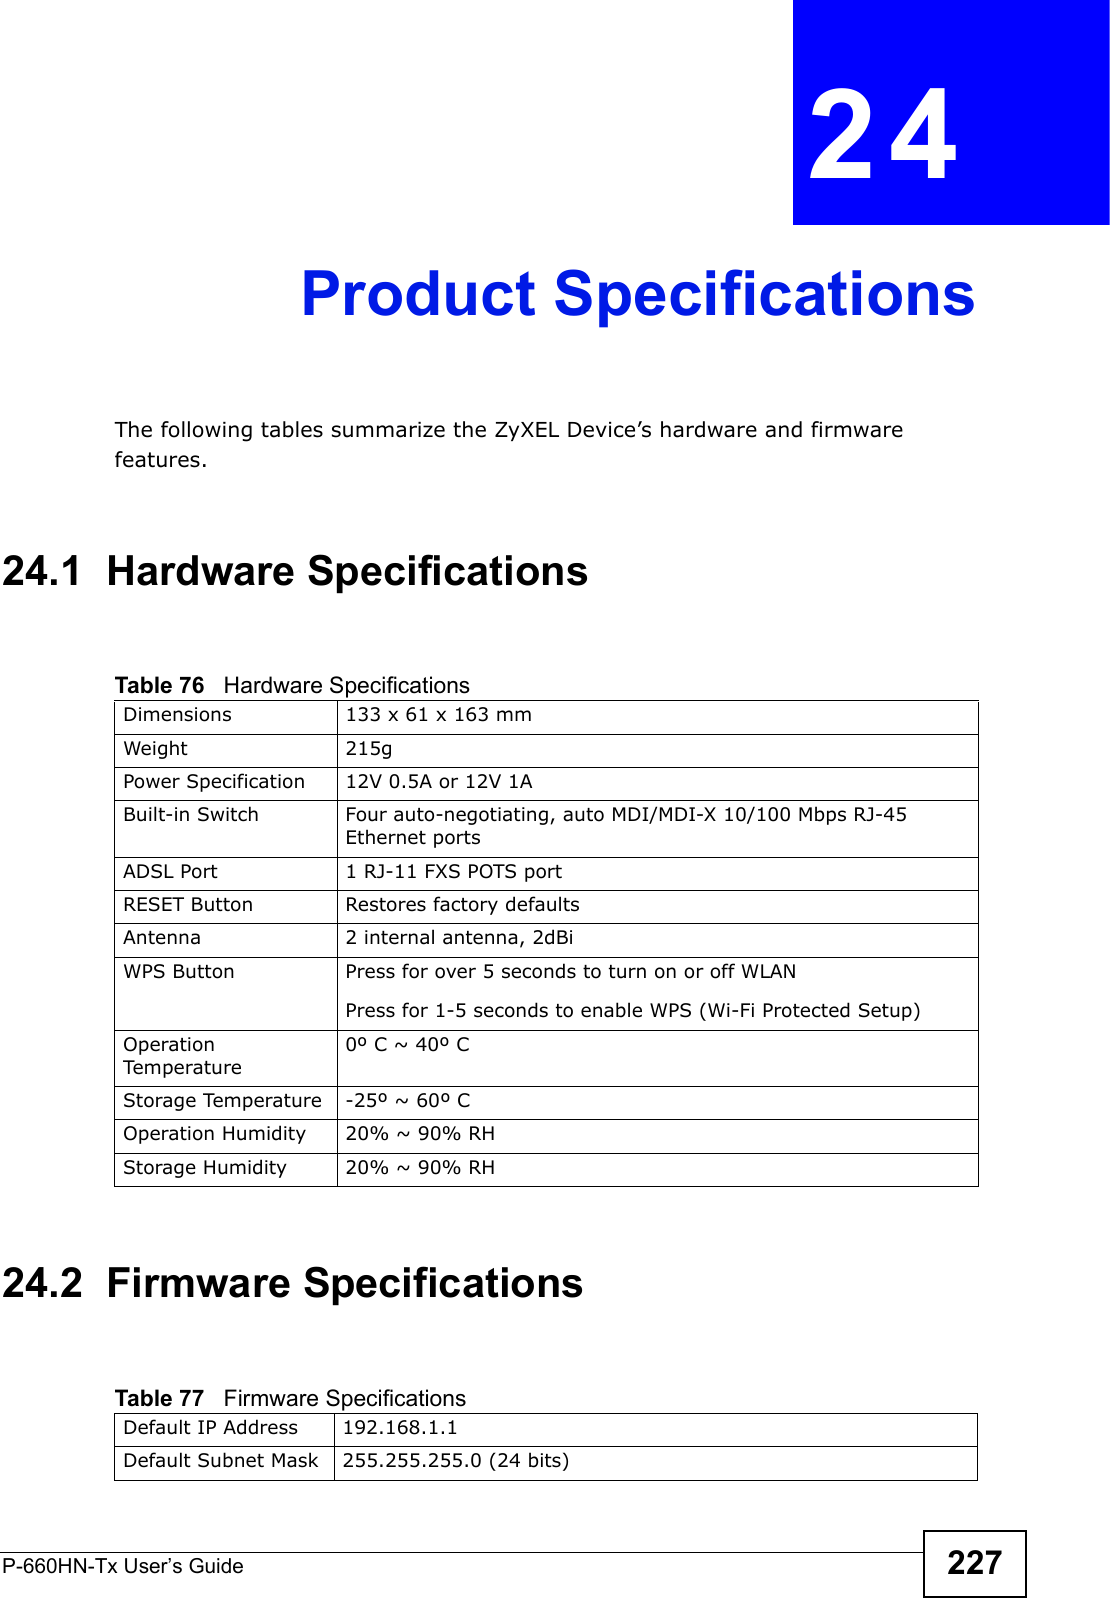 P-660HN-Tx User’s Guide 227CHAPTER  24 Product SpecificationsThe following tables summarize the ZyXEL Device’s hardware and firmware features.24.1  Hardware Specifications24.2  Firmware SpecificationsTable 76   Hardware SpecificationsDimensions 133 x 61 x 163 mmWeight 215gPower Specification 12V 0.5A or 12V 1ABuilt-in Switch Four auto-negotiating, auto MDI/MDI-X 10/100 Mbps RJ-45 Ethernet portsADSL Port 1 RJ-11 FXS POTS portRESET Button Restores factory defaultsAntenna 2 internal antenna, 2dBiWPS Button Press for over 5 seconds to turn on or off WLANPress for 1-5 seconds to enable WPS (Wi-Fi Protected Setup)Operation Temperature0º C ~ 40º CStorage Temperature -25º ~ 60º COperation Humidity 20% ~ 90% RHStorage Humidity 20% ~ 90% RHTable 77   Firmware Specifications Default IP Address 192.168.1.1Default Subnet Mask 255.255.255.0 (24 bits)